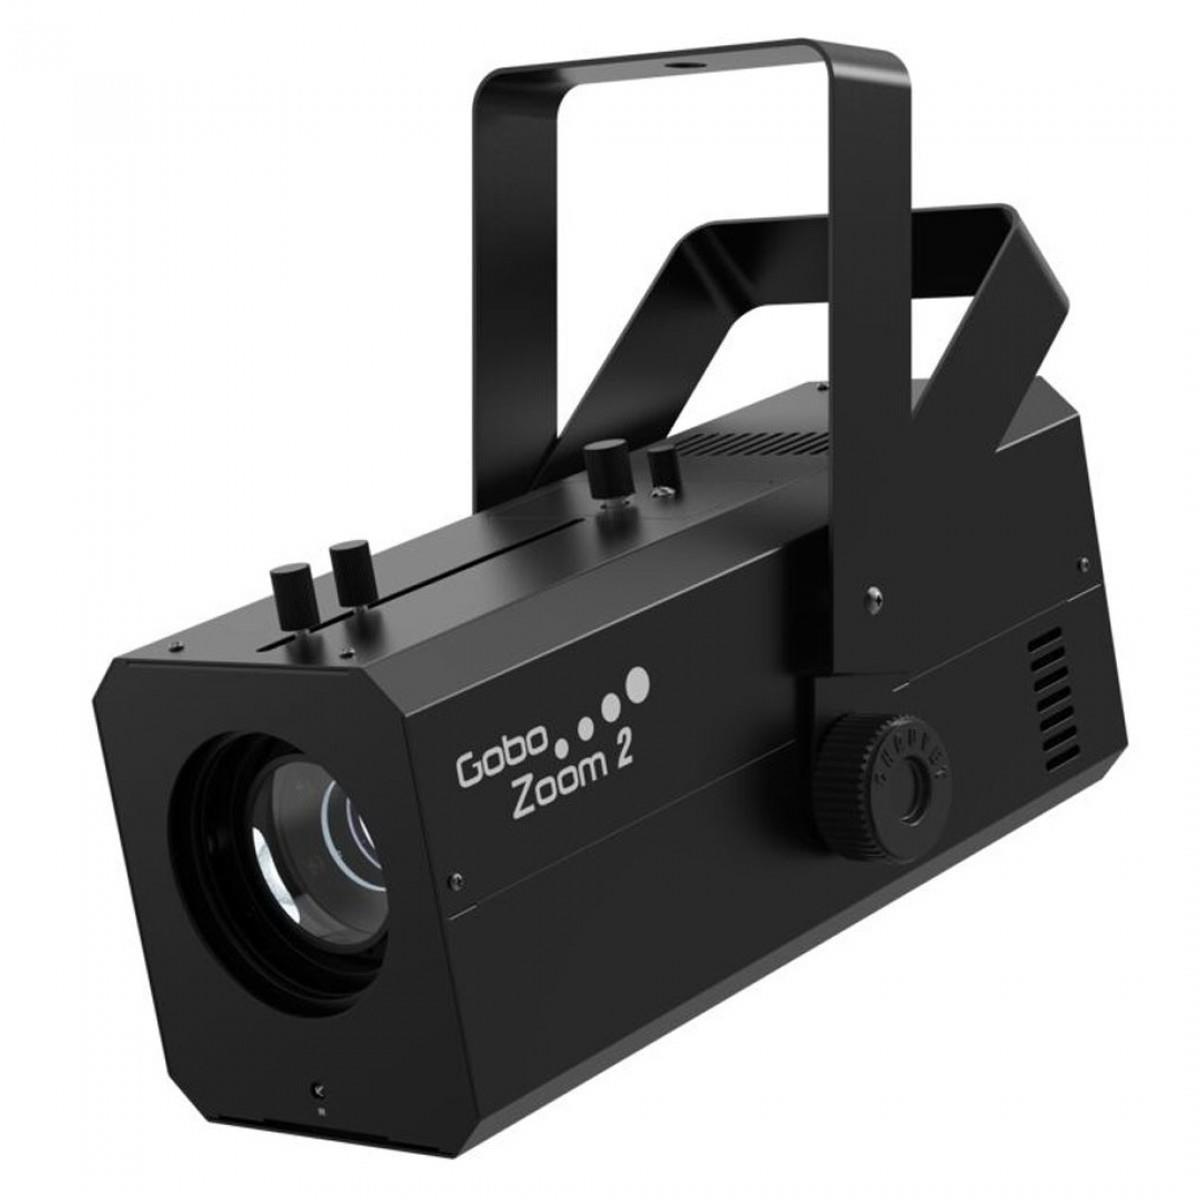 Chauvet Gobo Zoom 2 Gobo Projector - DY Pro Audio